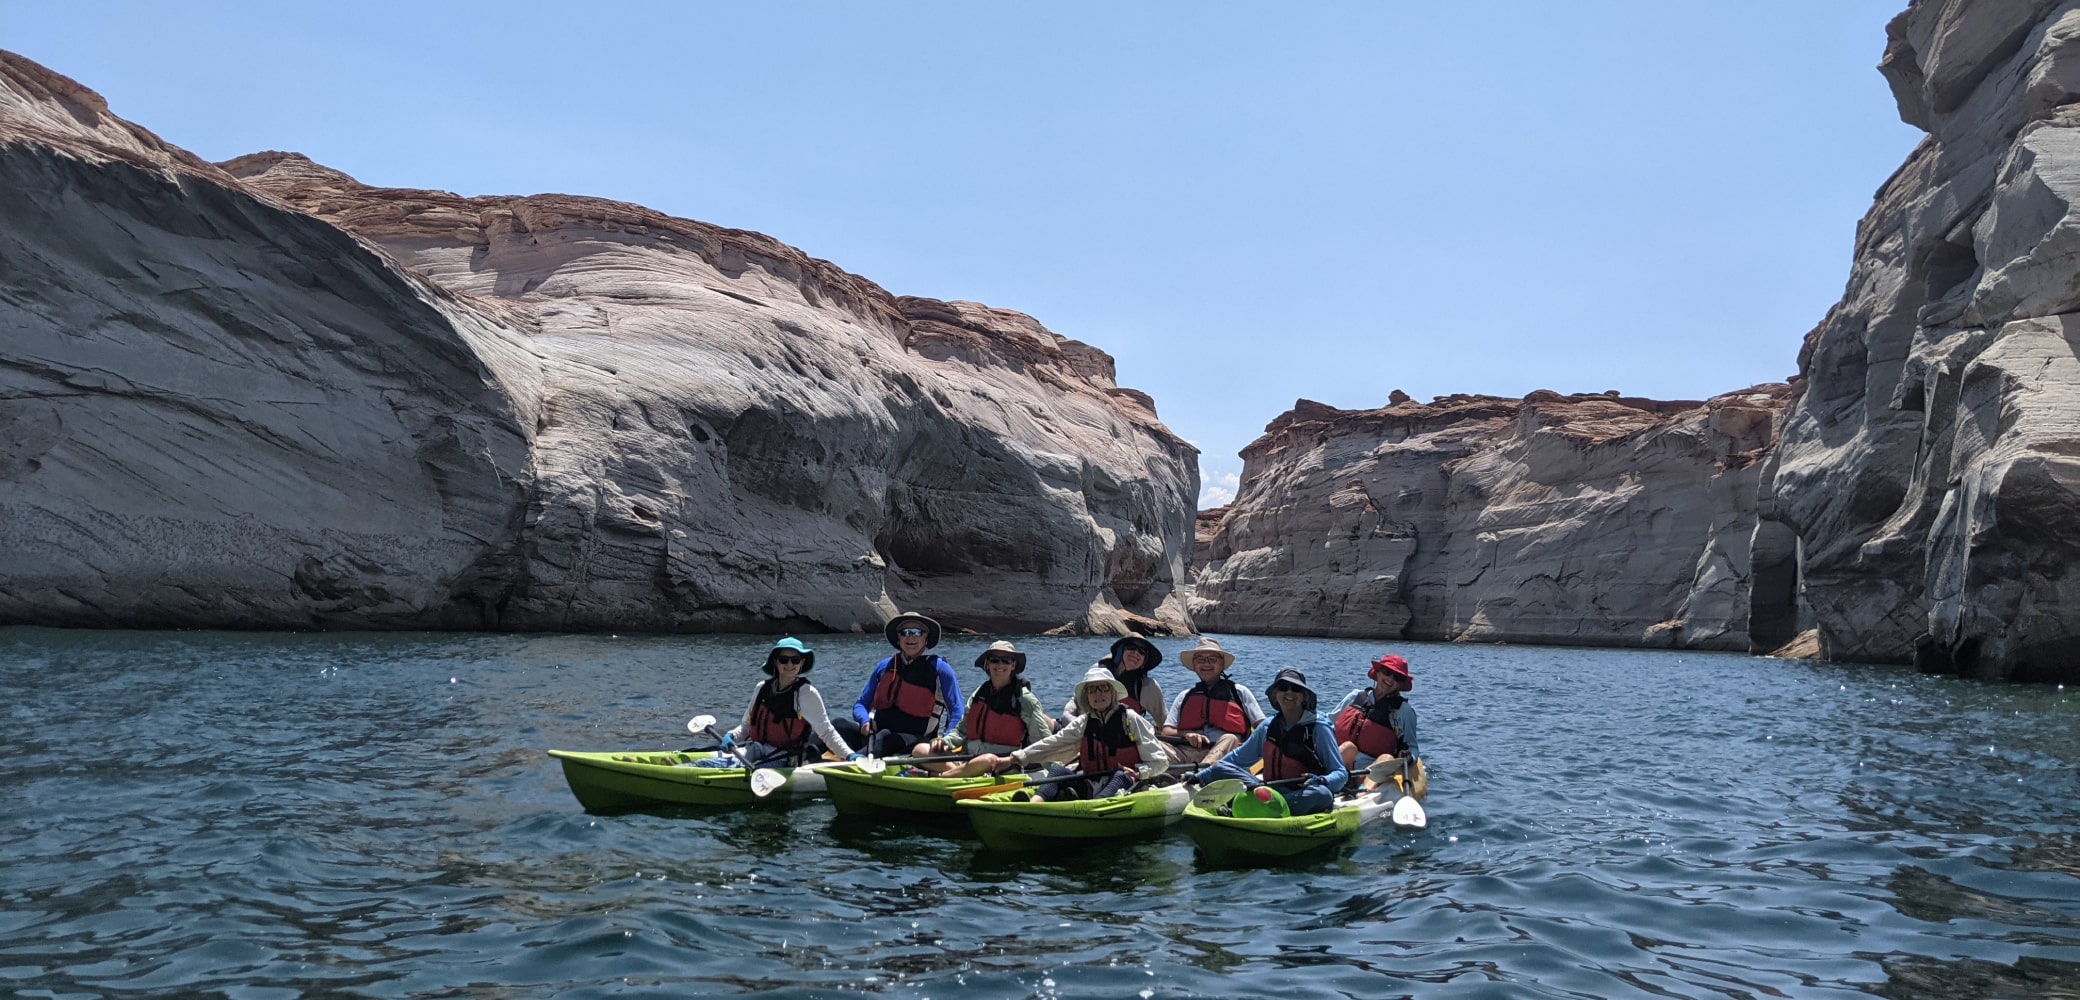 group of people kayaking in labyrinth canyon on lake powell